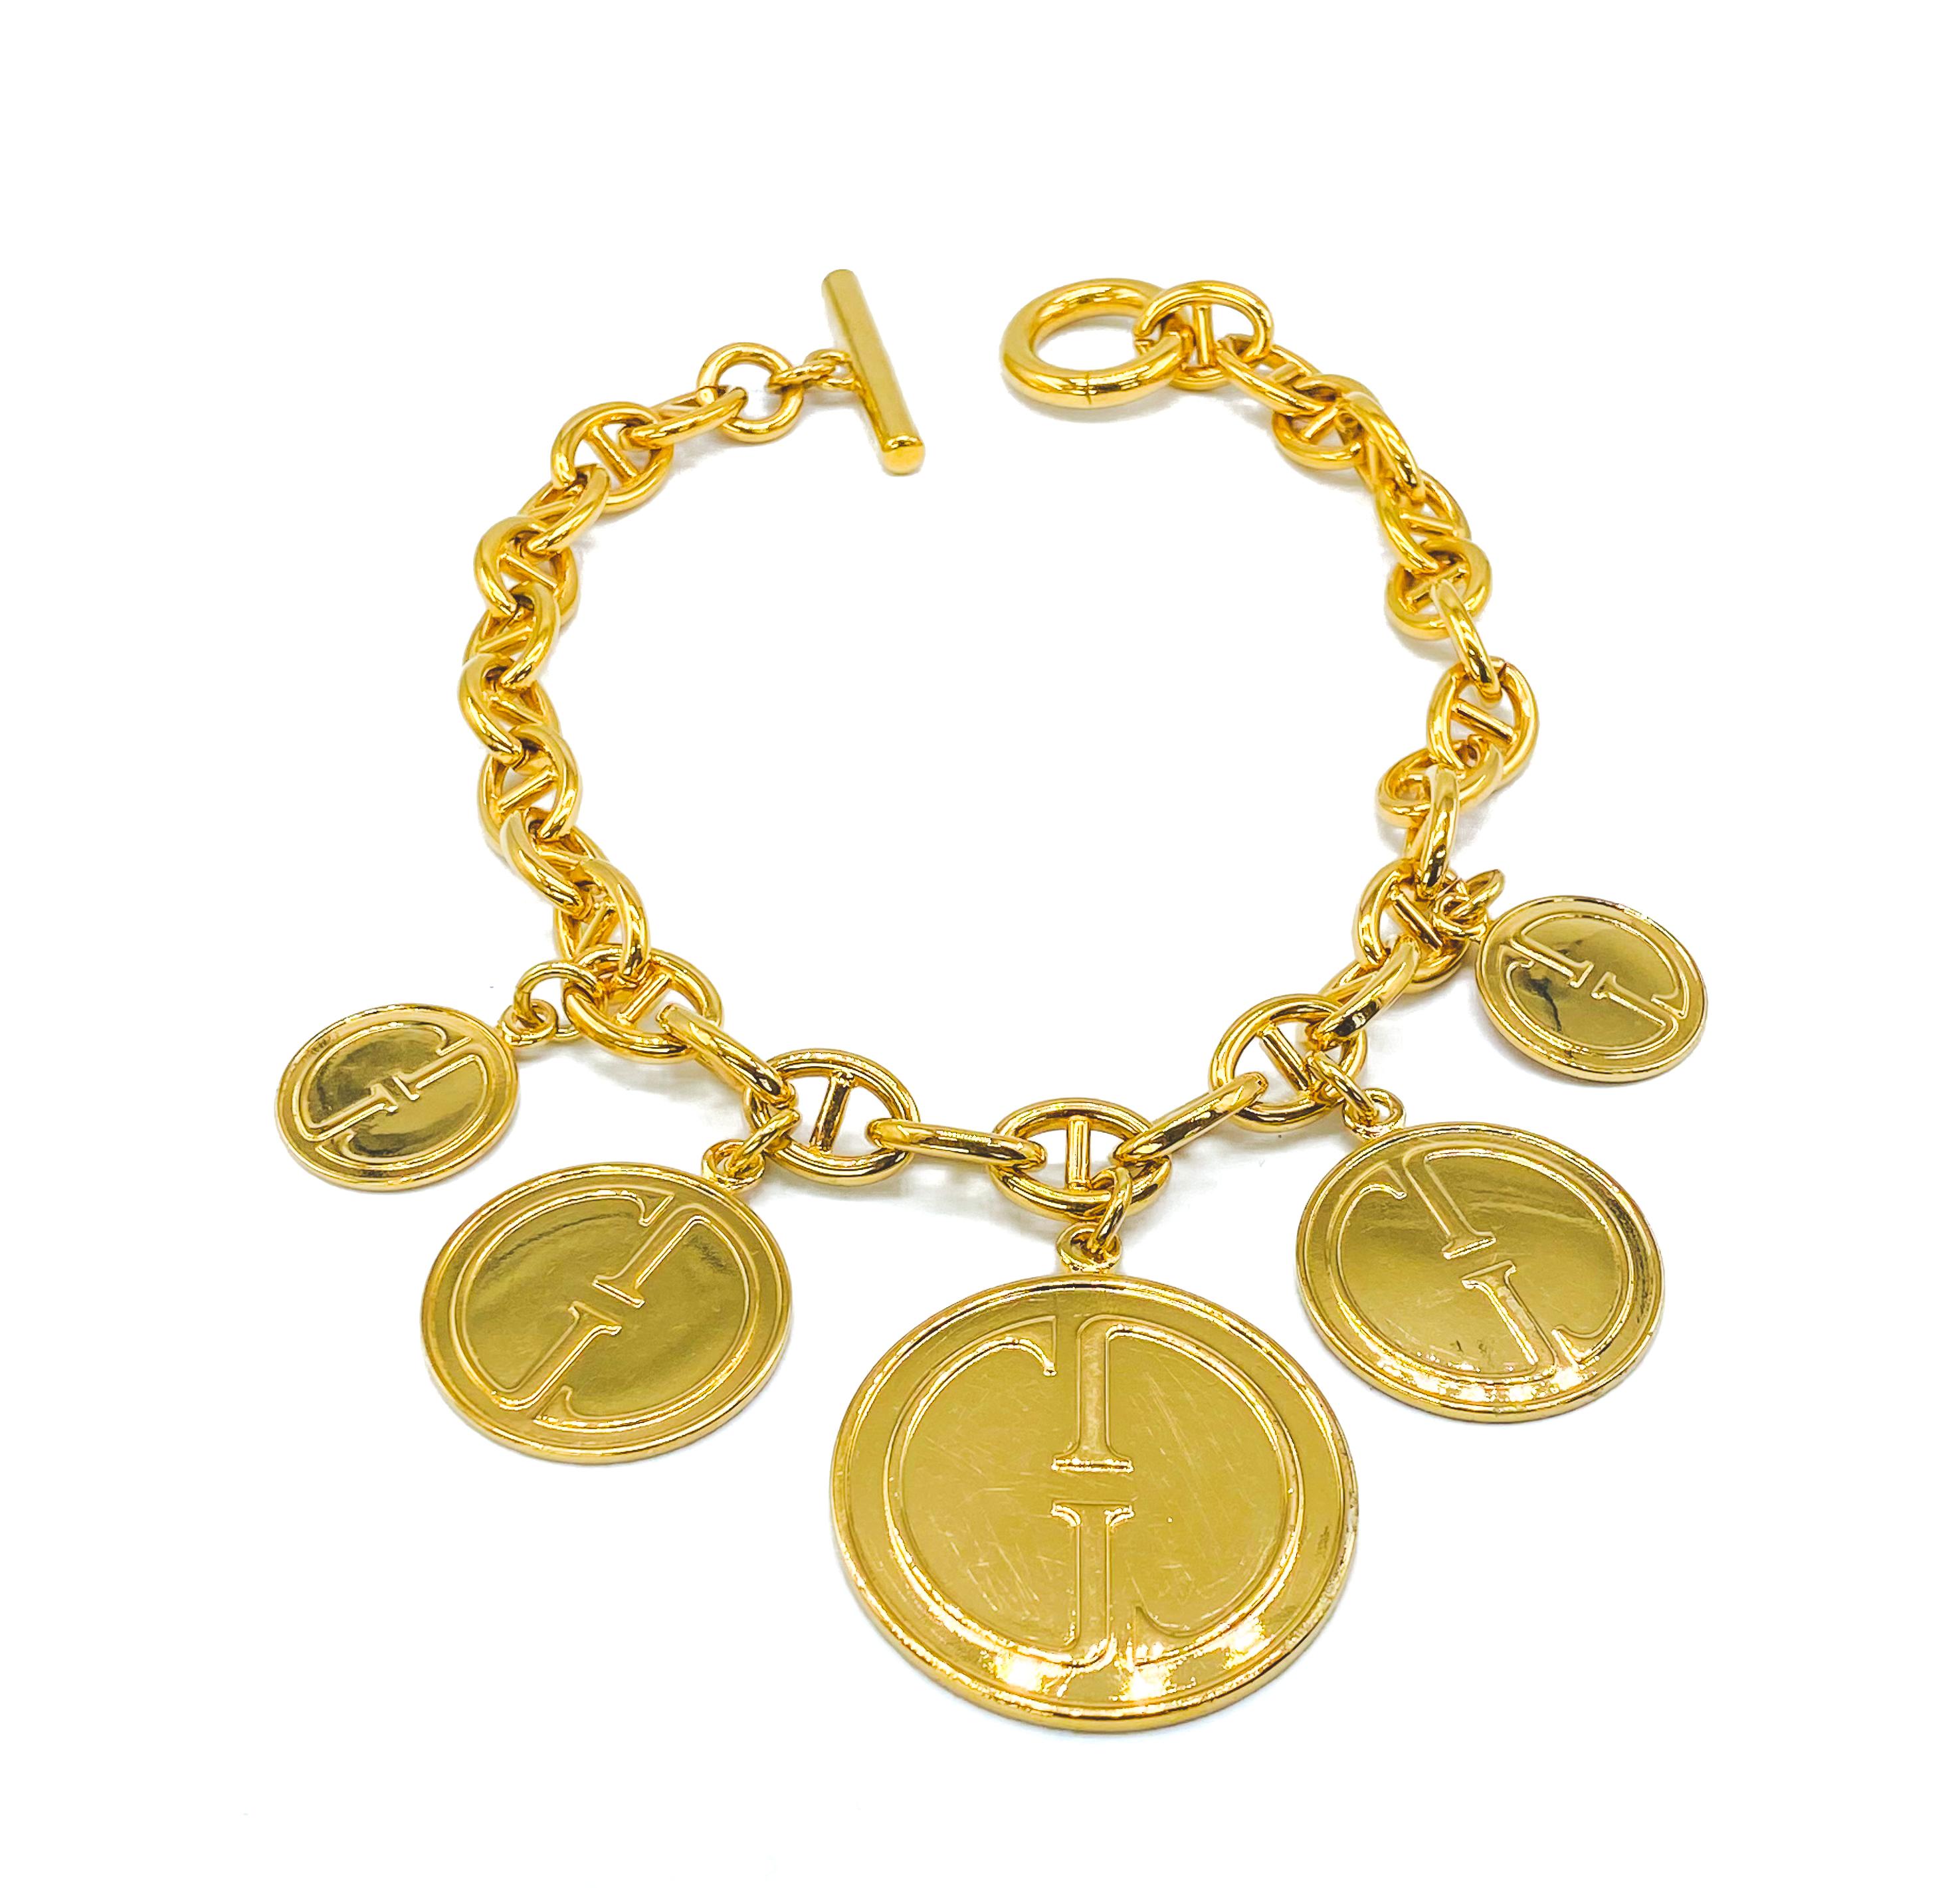 Gucci Vintage Charm Necklace

A rare and collectable statement piece from the Gucci 90s archive 

Detail
-Made in Italy in the early-mid 1990s
-Crafted from gold plated metal
-Chunky chain with signed toggle clasp
-Five 70s inspired GG logo